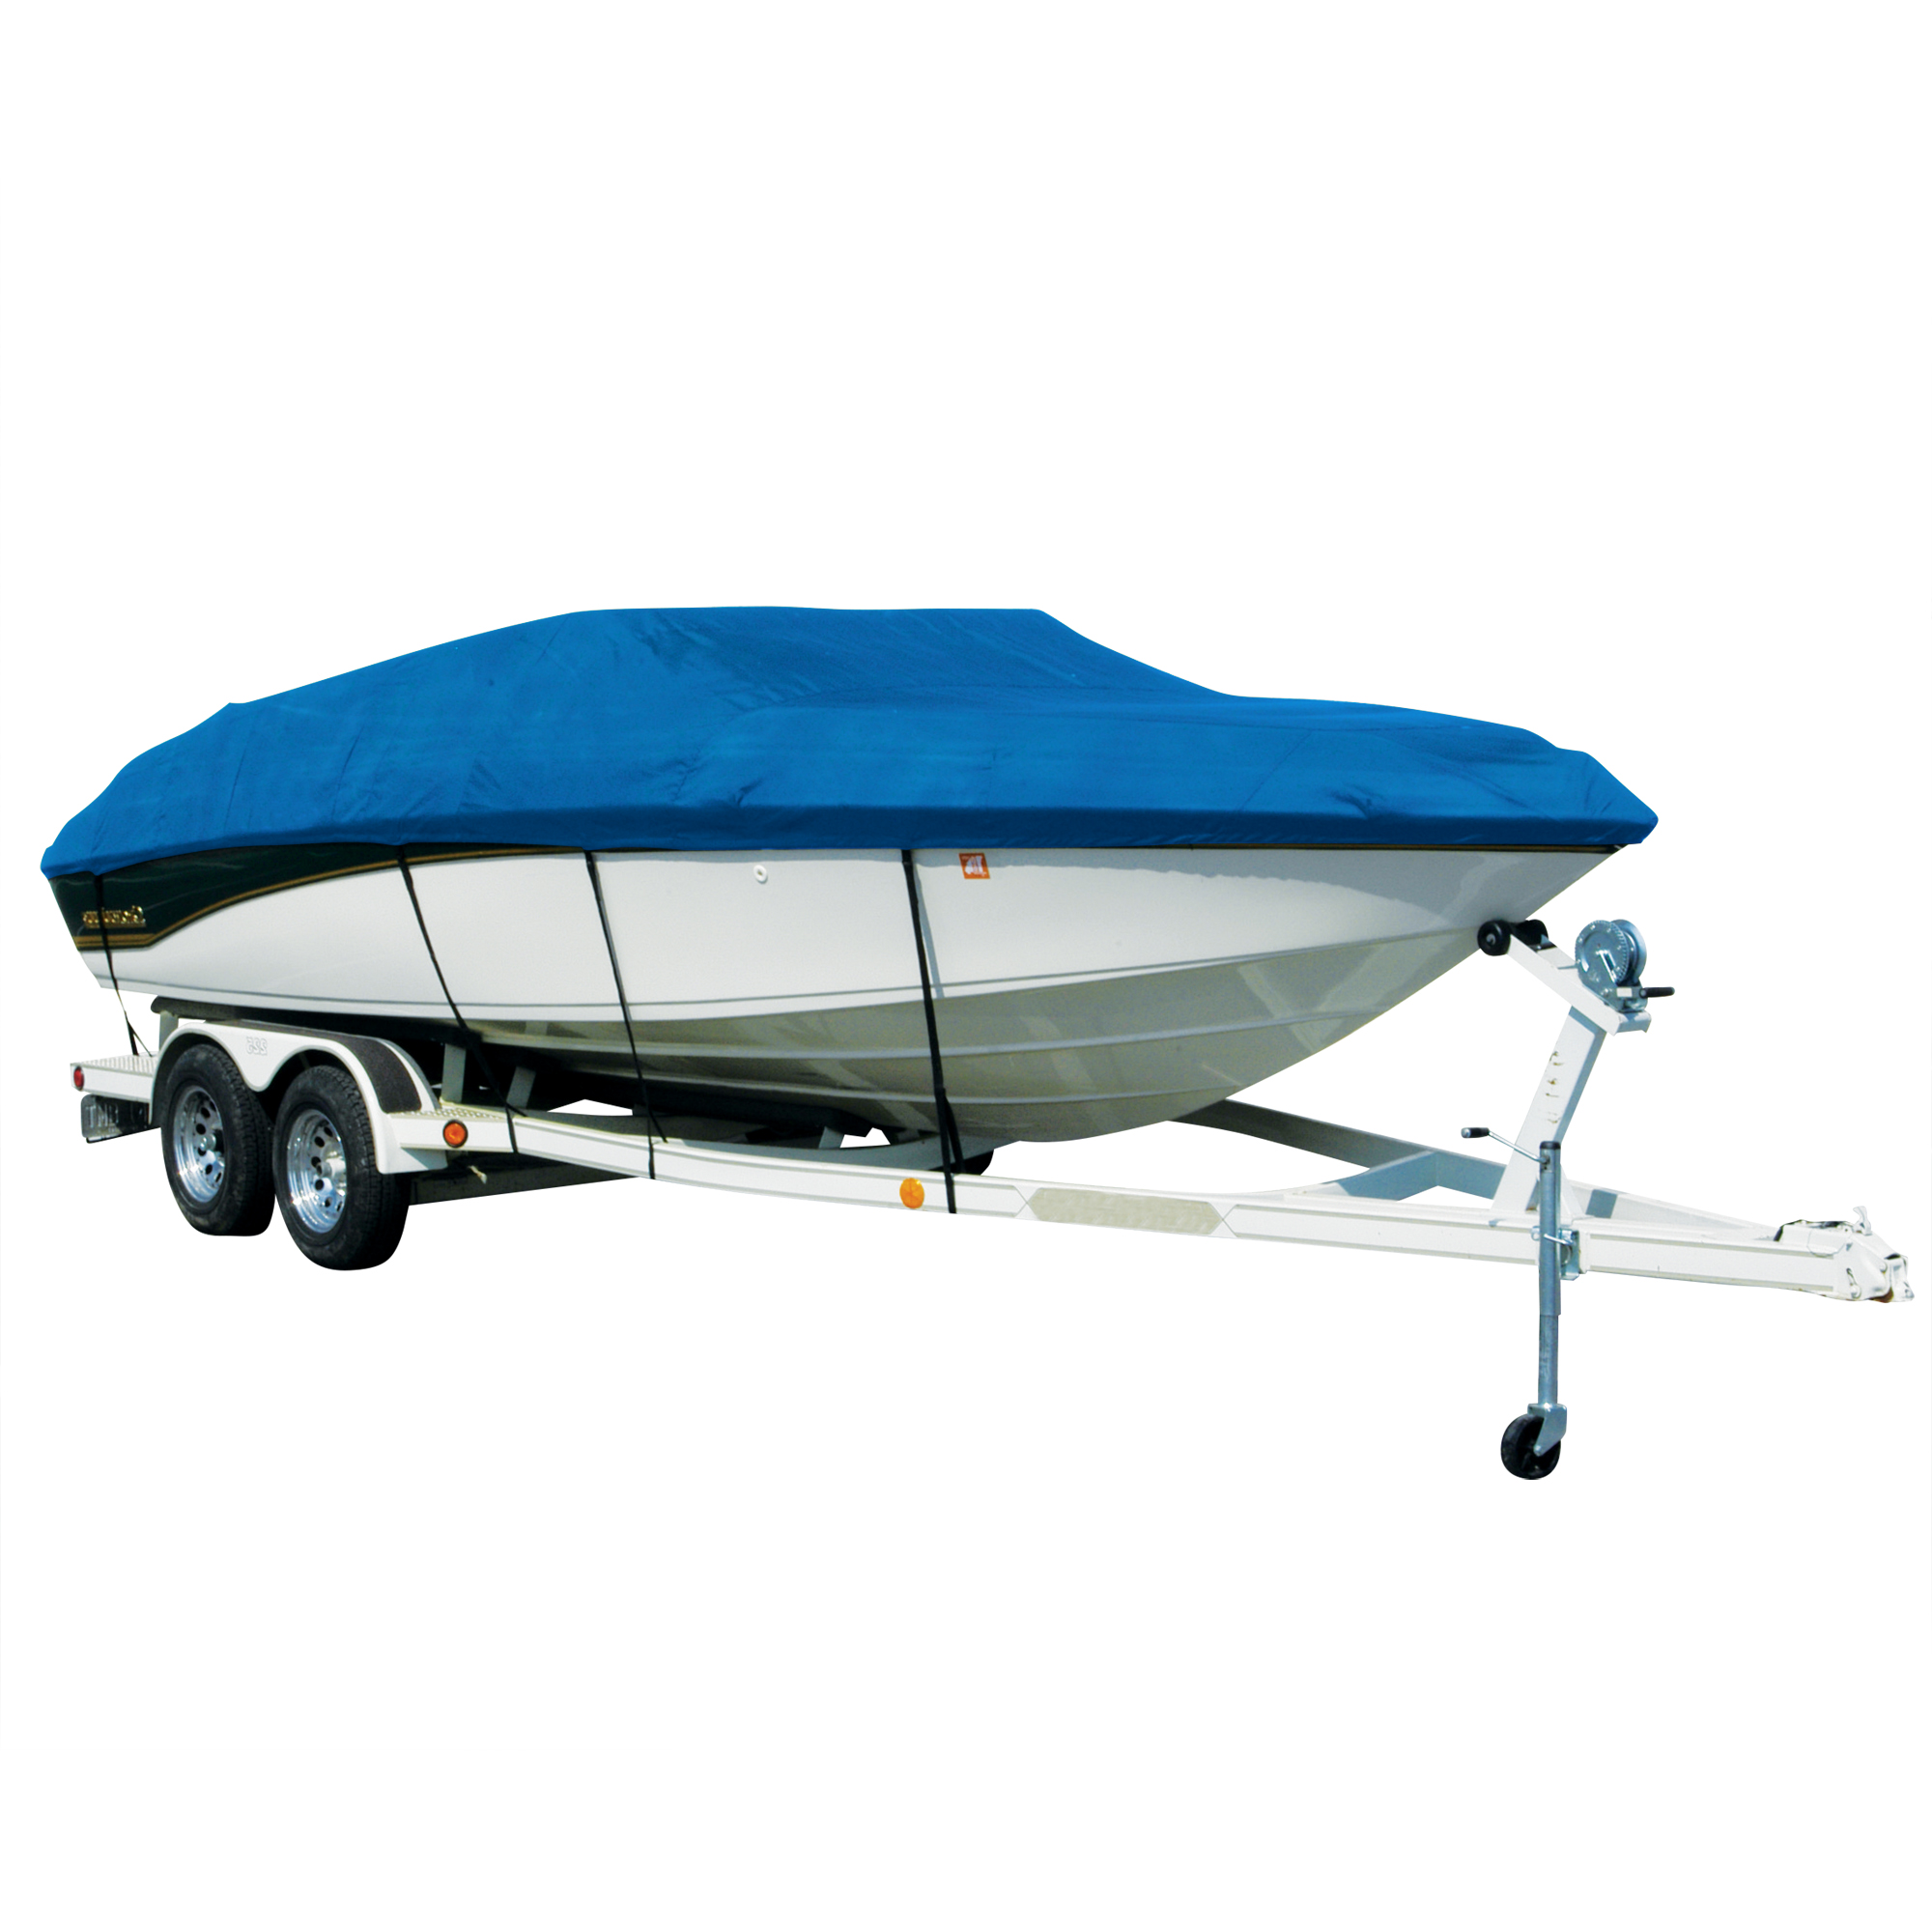 help my setup my bayliner for wakeboarding! - Boats, Accessories